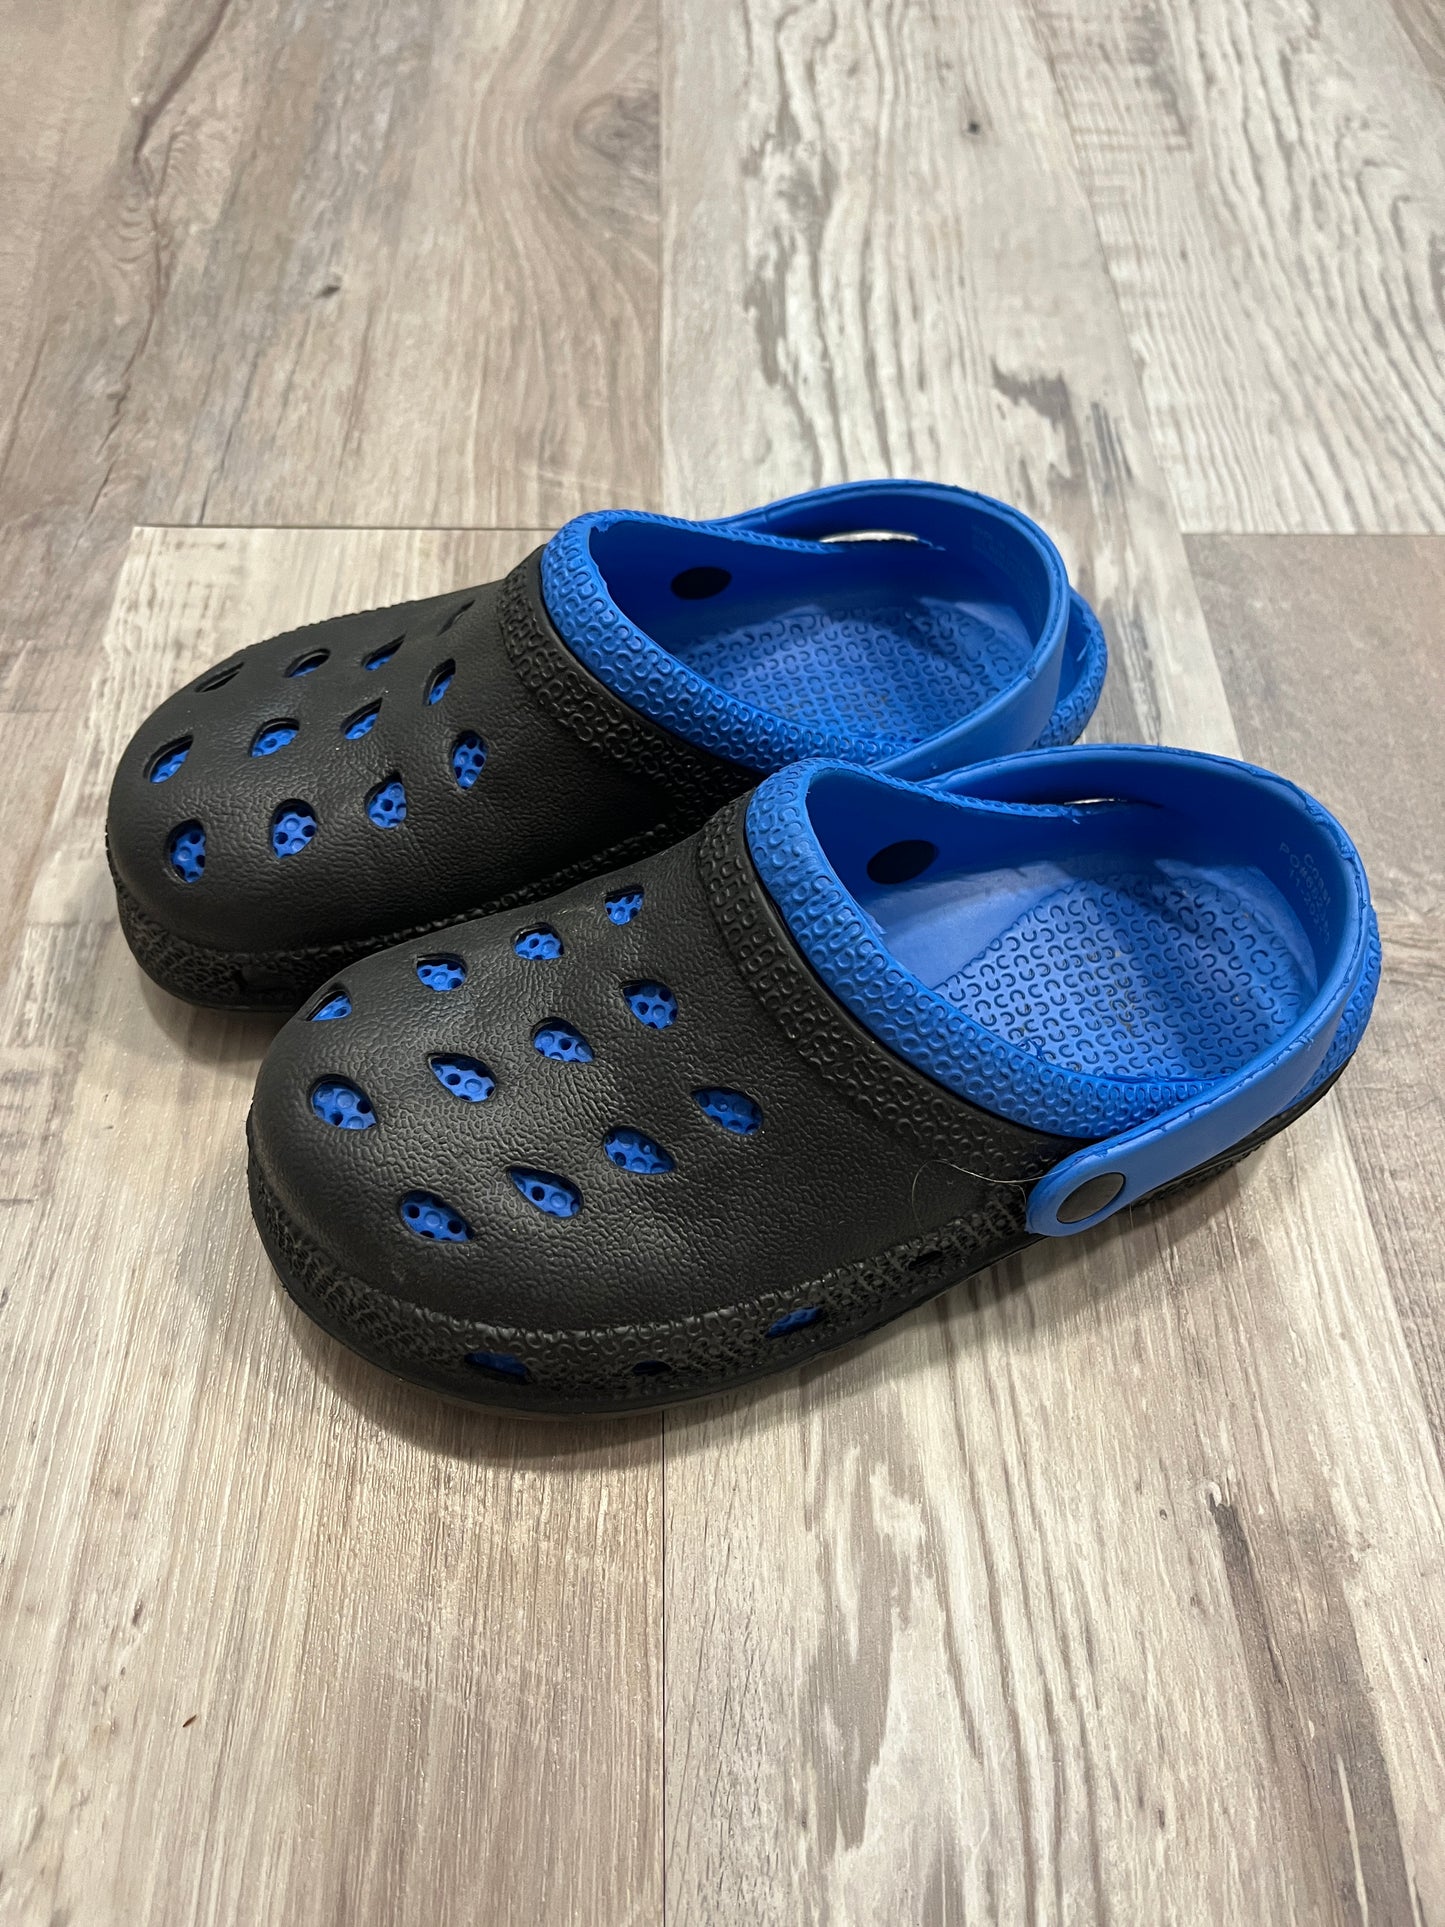 Boys Black and Blue Slip On Shoes Size 2